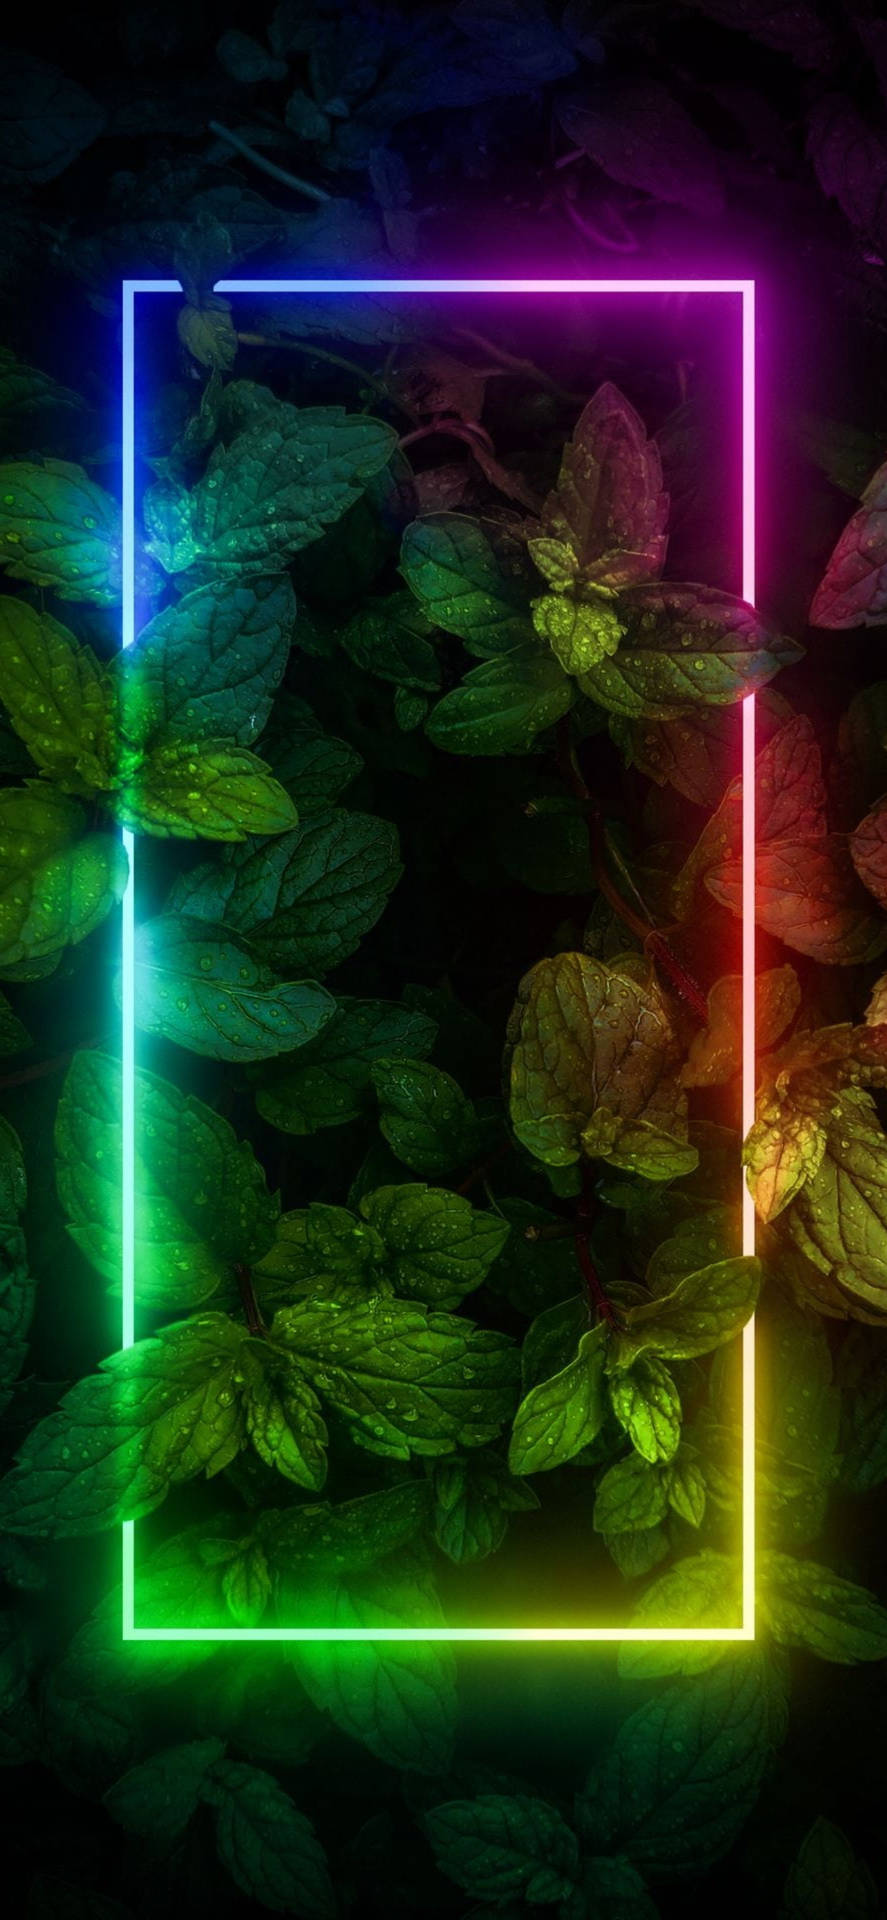 Plants With Border Neon Aesthetic Iphone Wallpaper